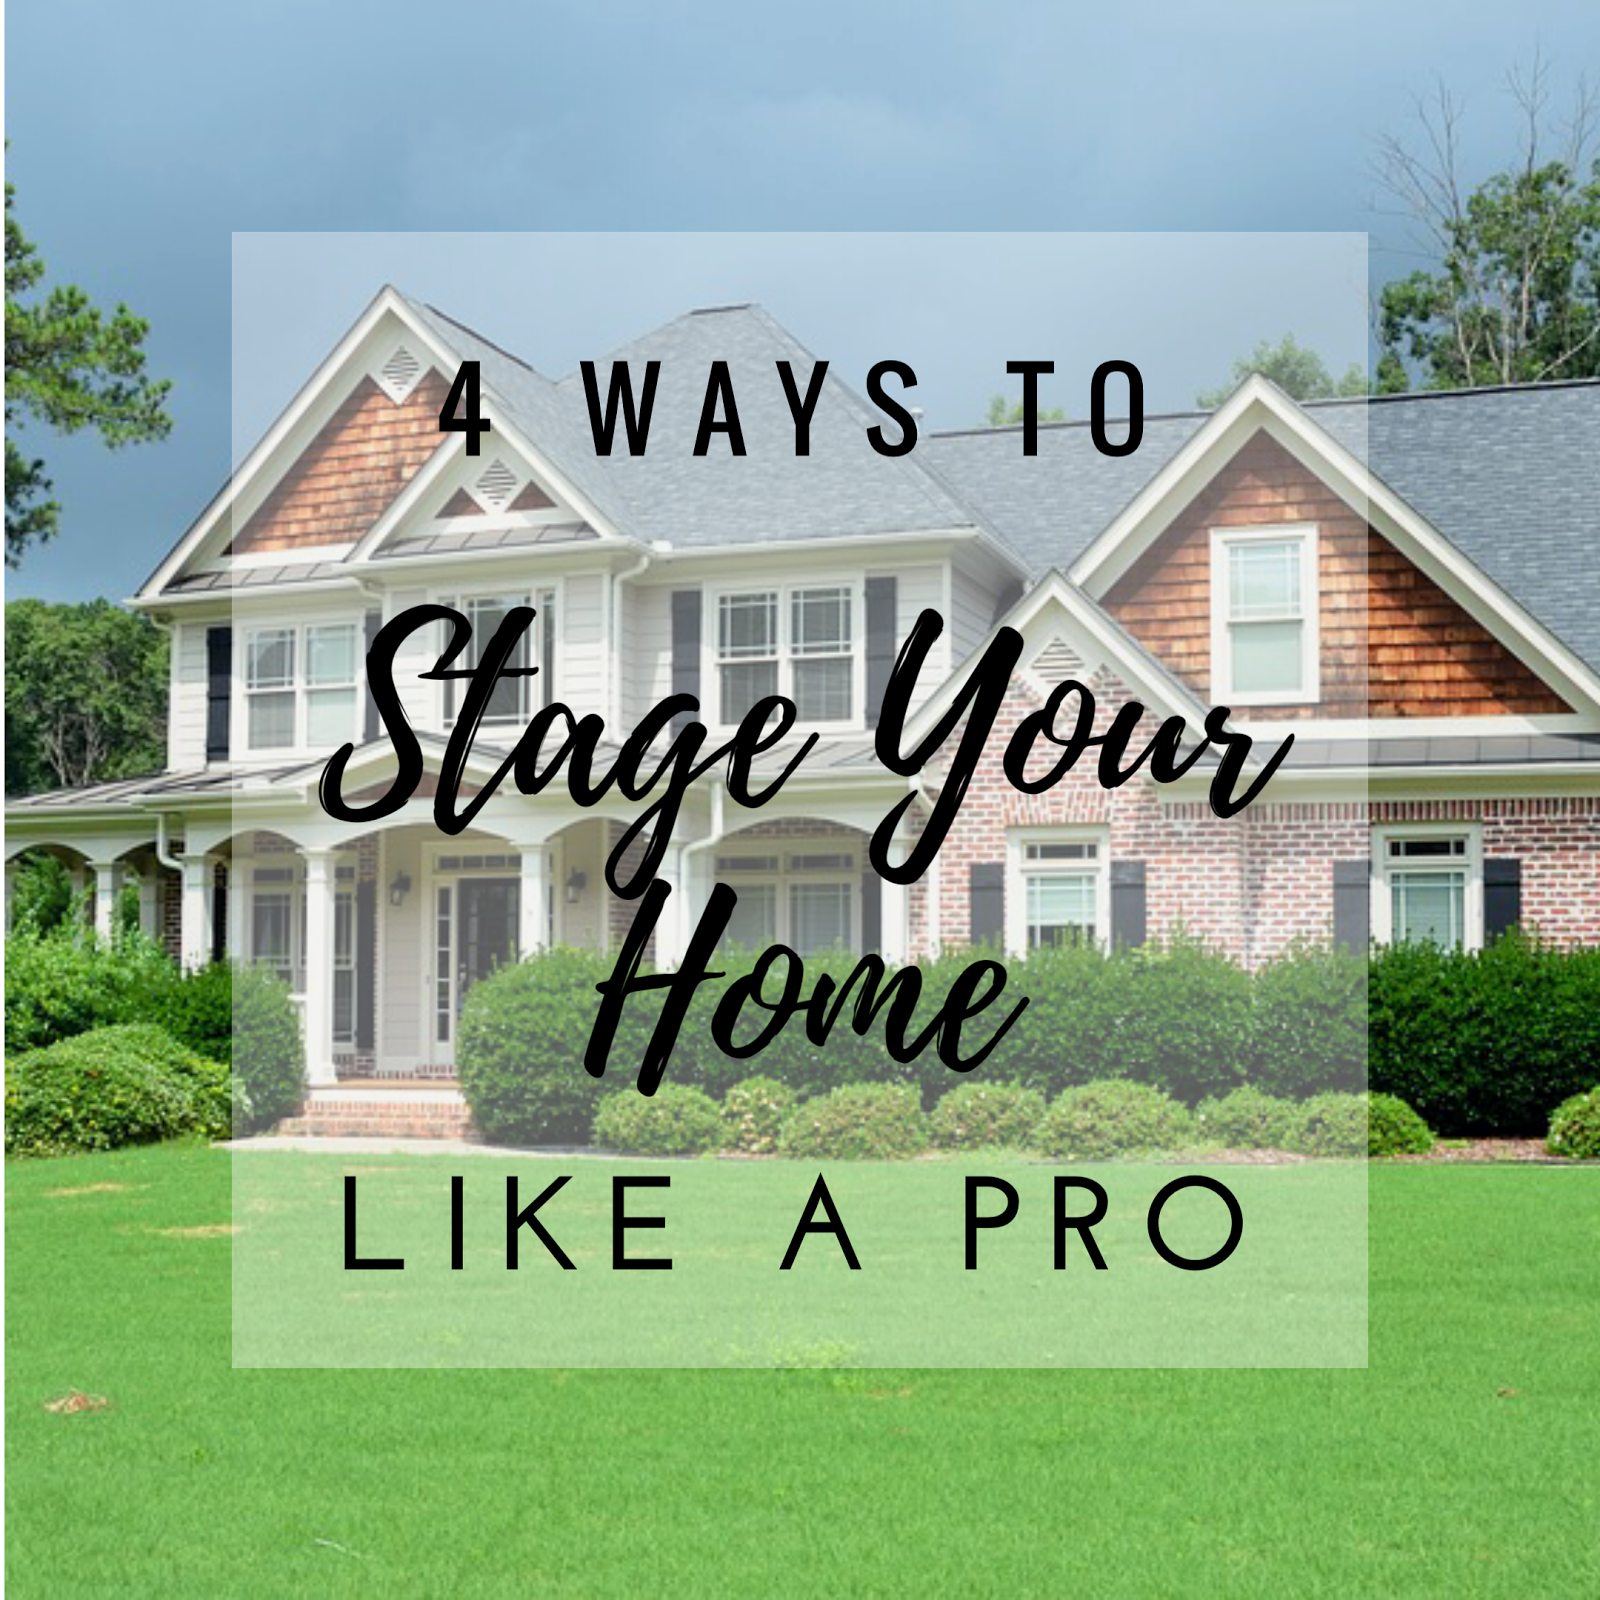 How To Stage Your Home To Set It Apart From The Crowd